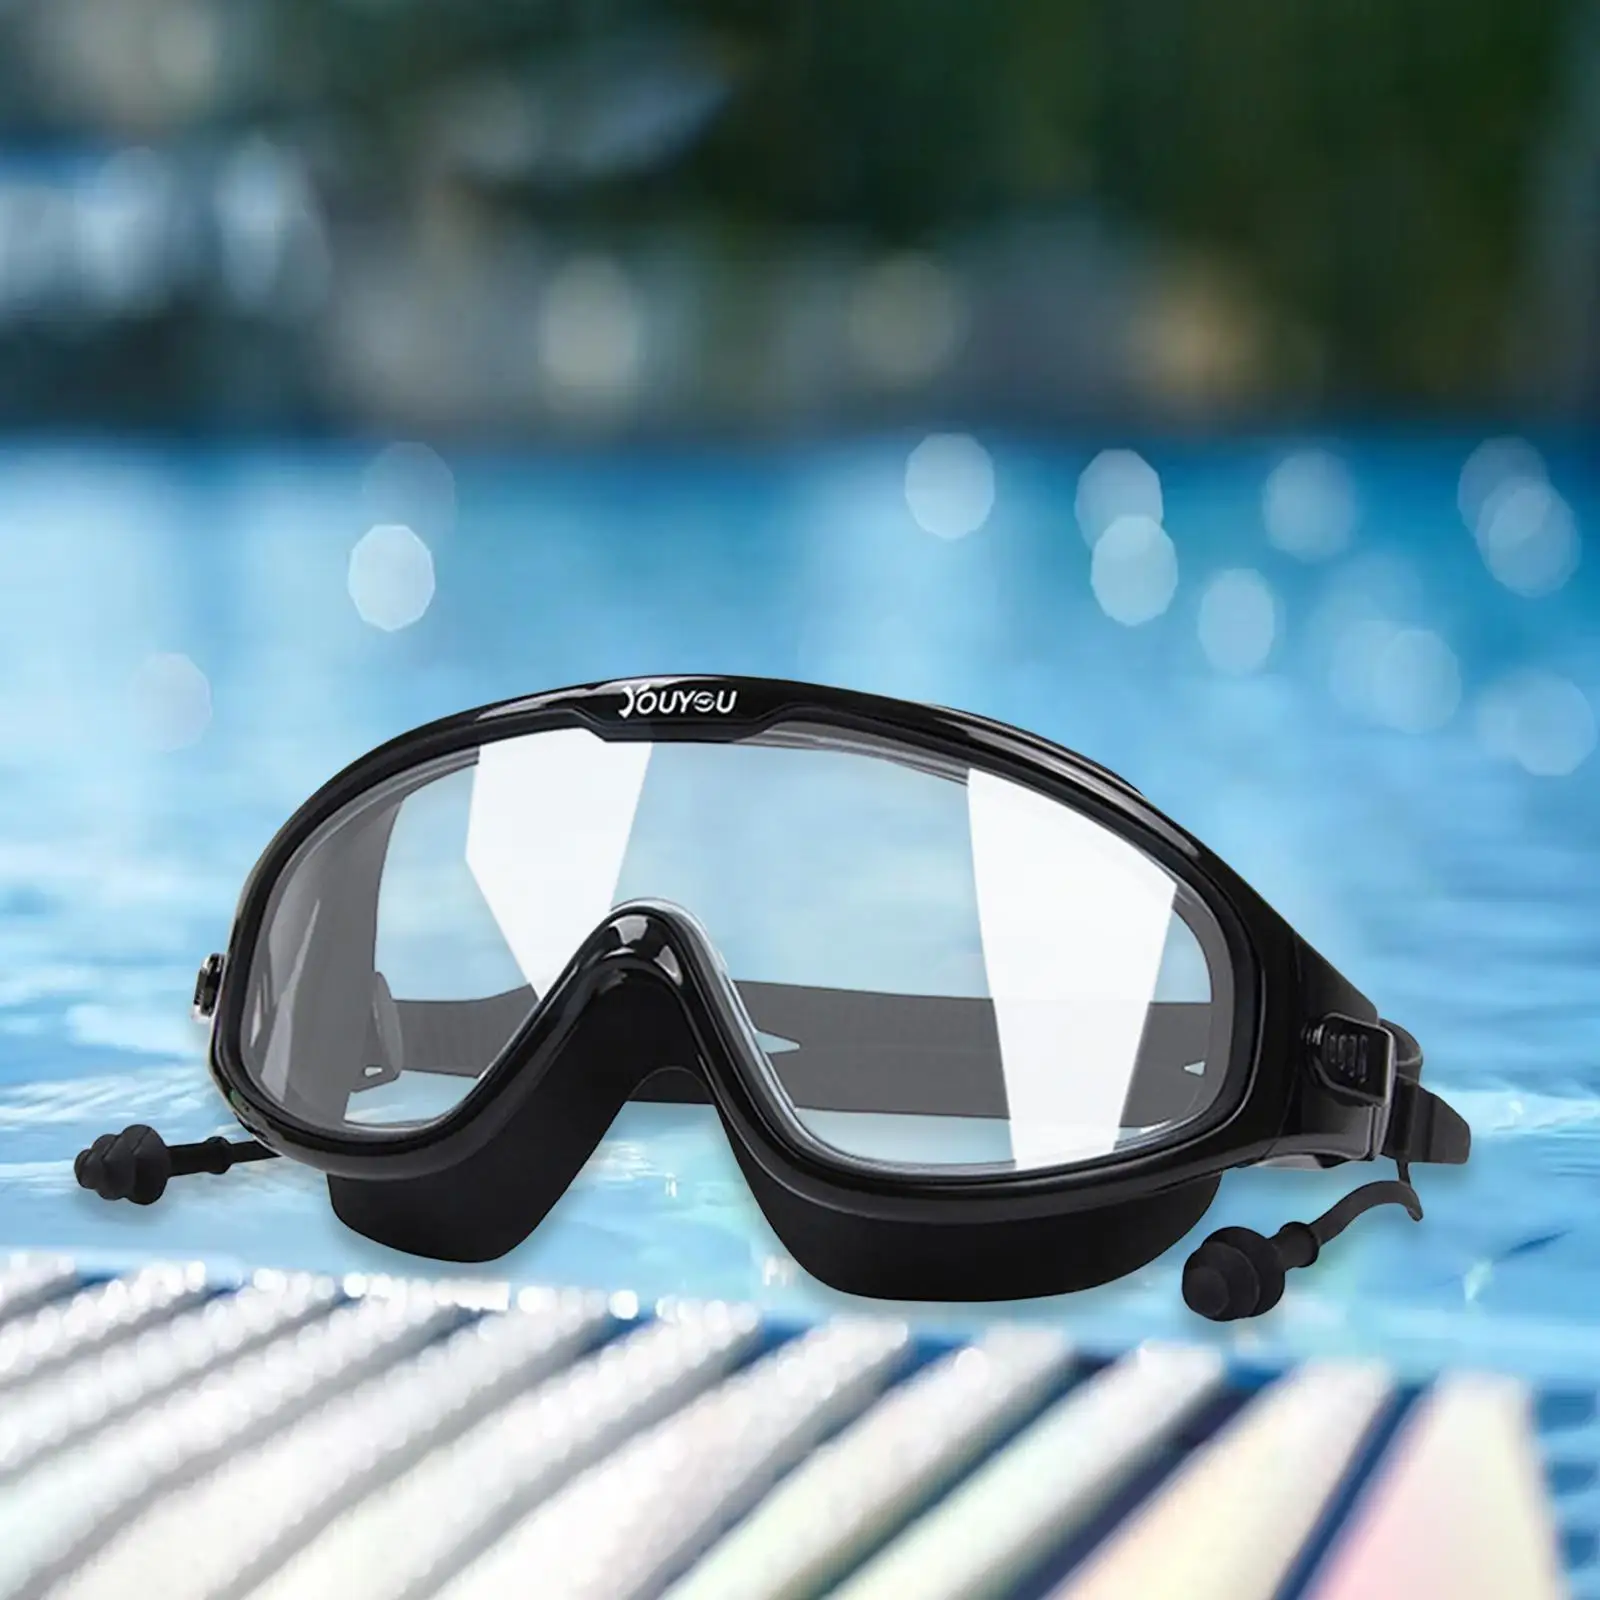 Swimming Goggles Adjustable Clear View Waterproof No Leaking Swim Goggles